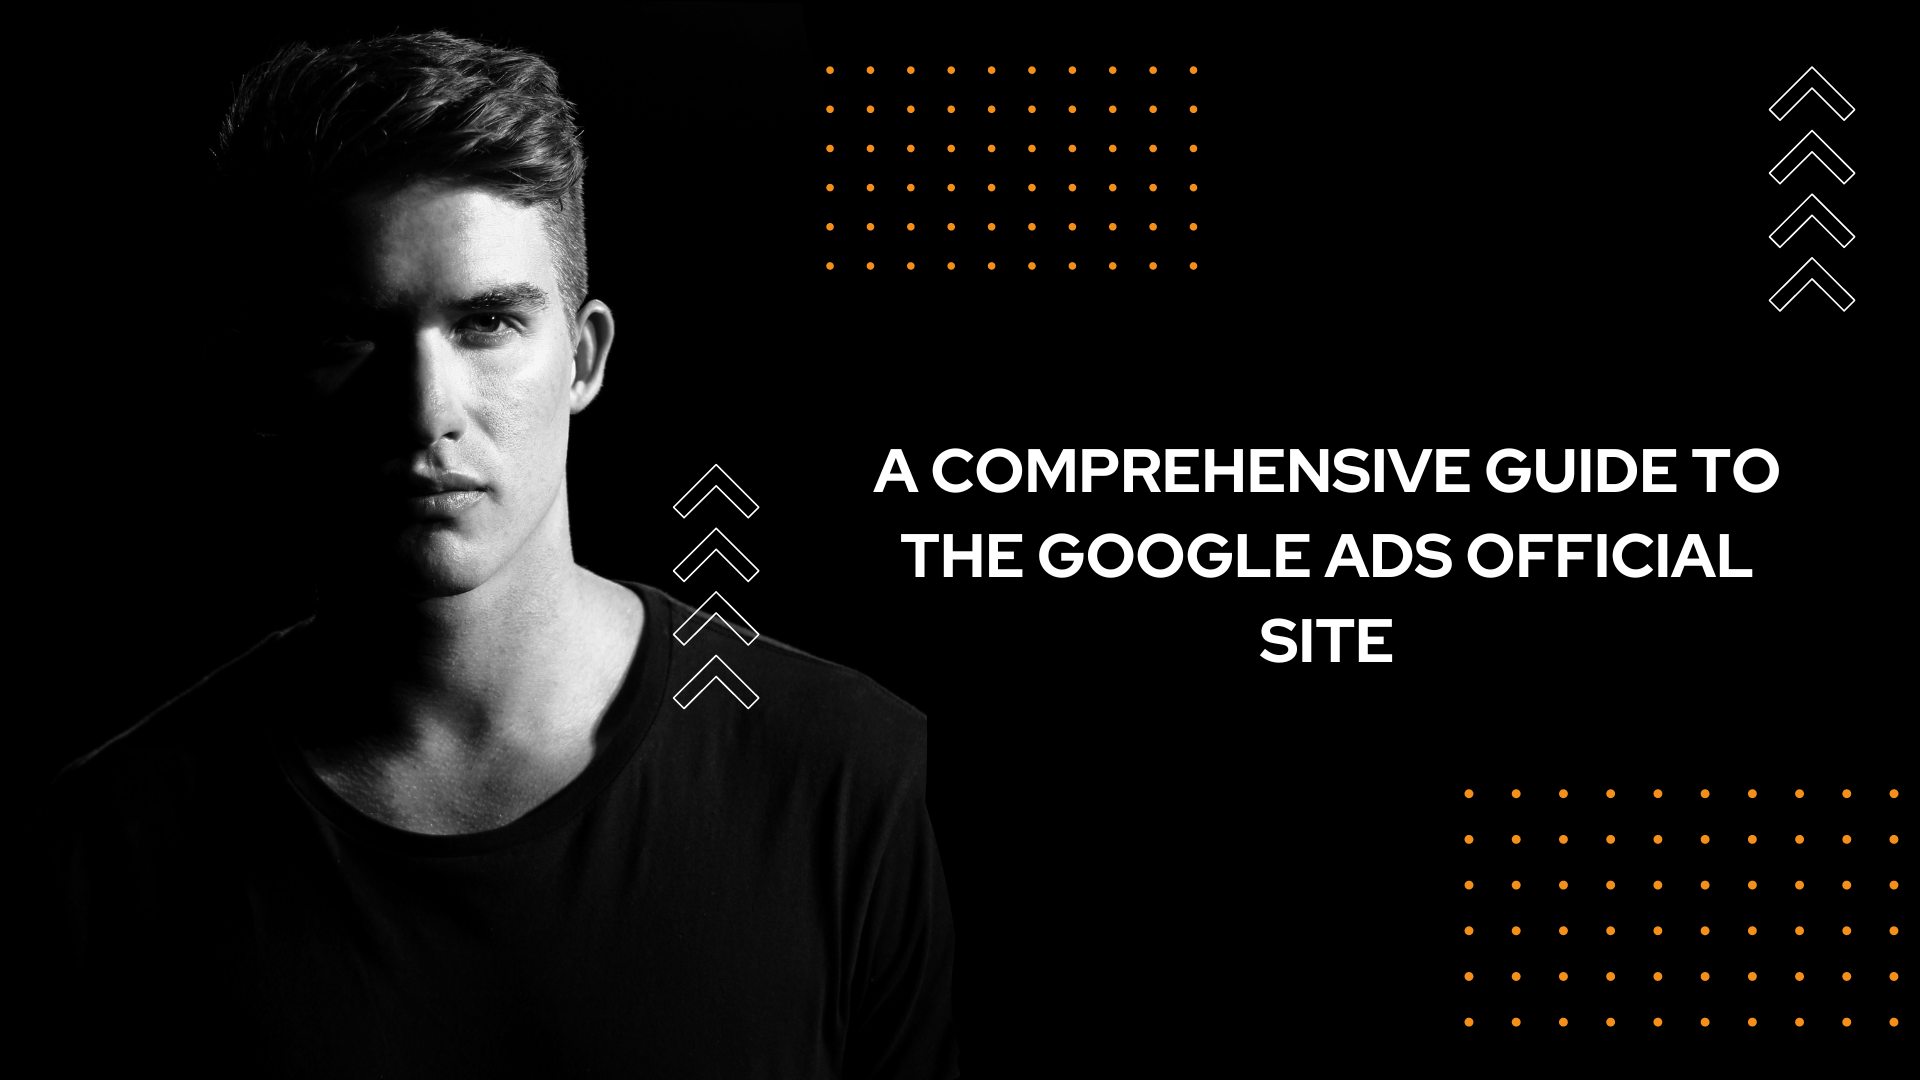 A Comprehensive Guide to the Google Ads Official Site